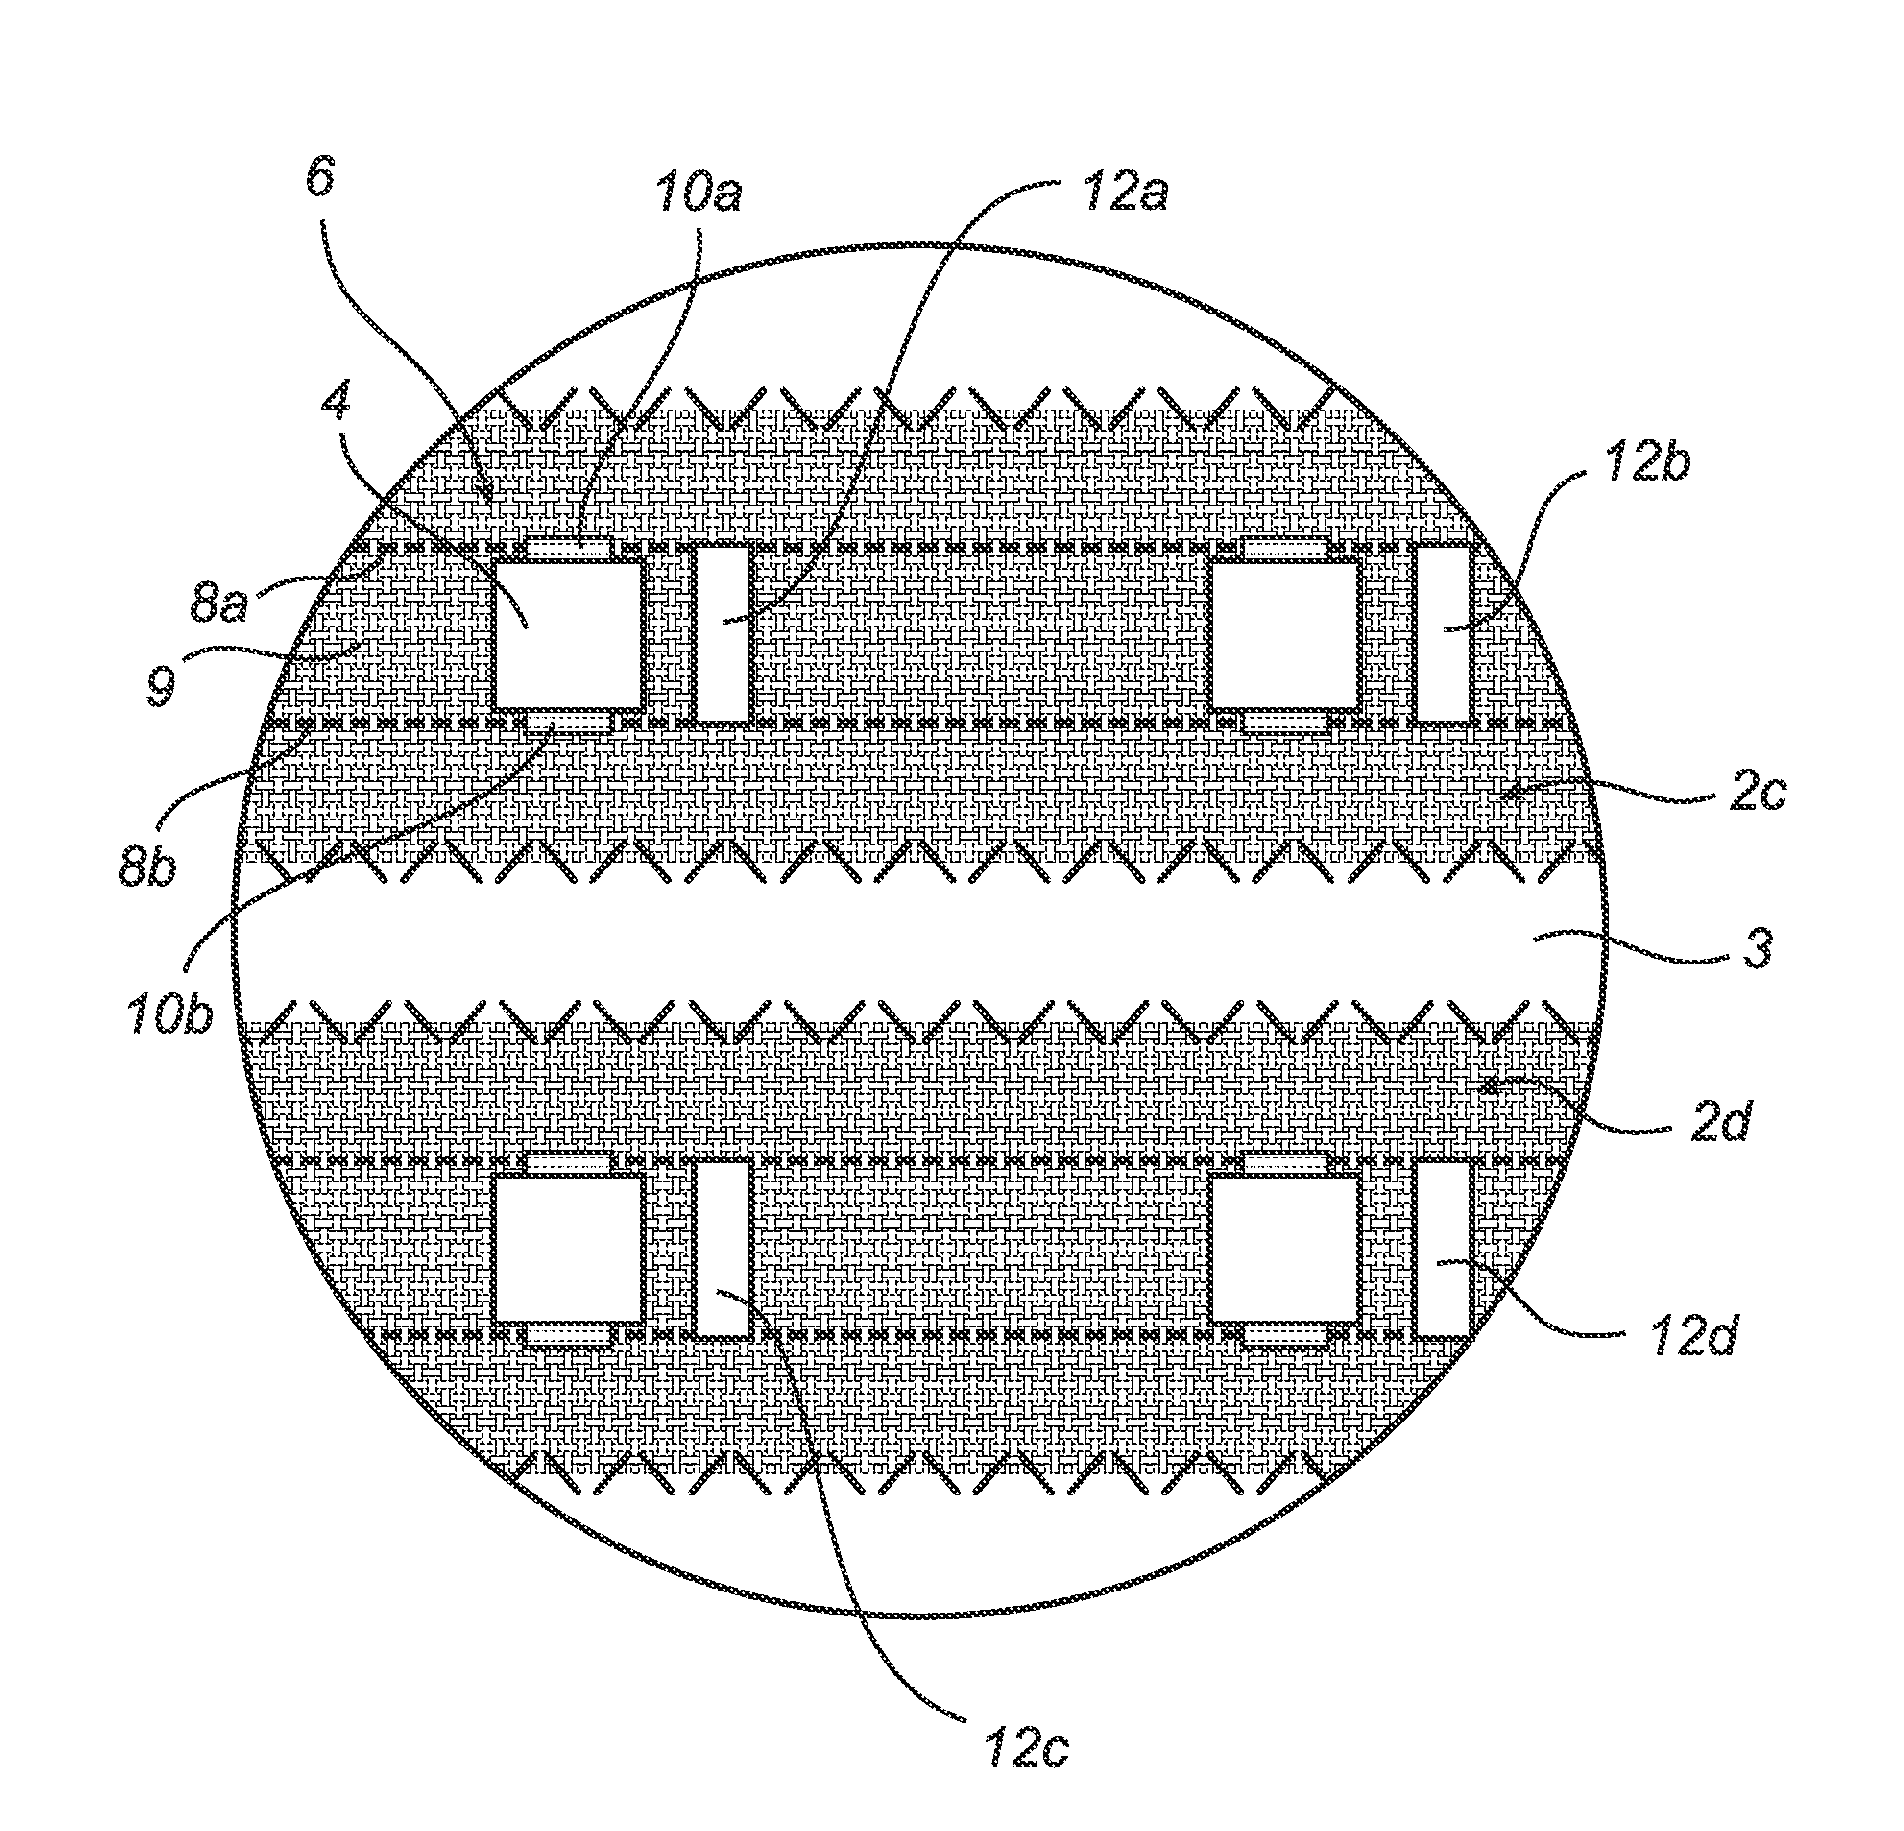 Electronic textile with local energy supply devices